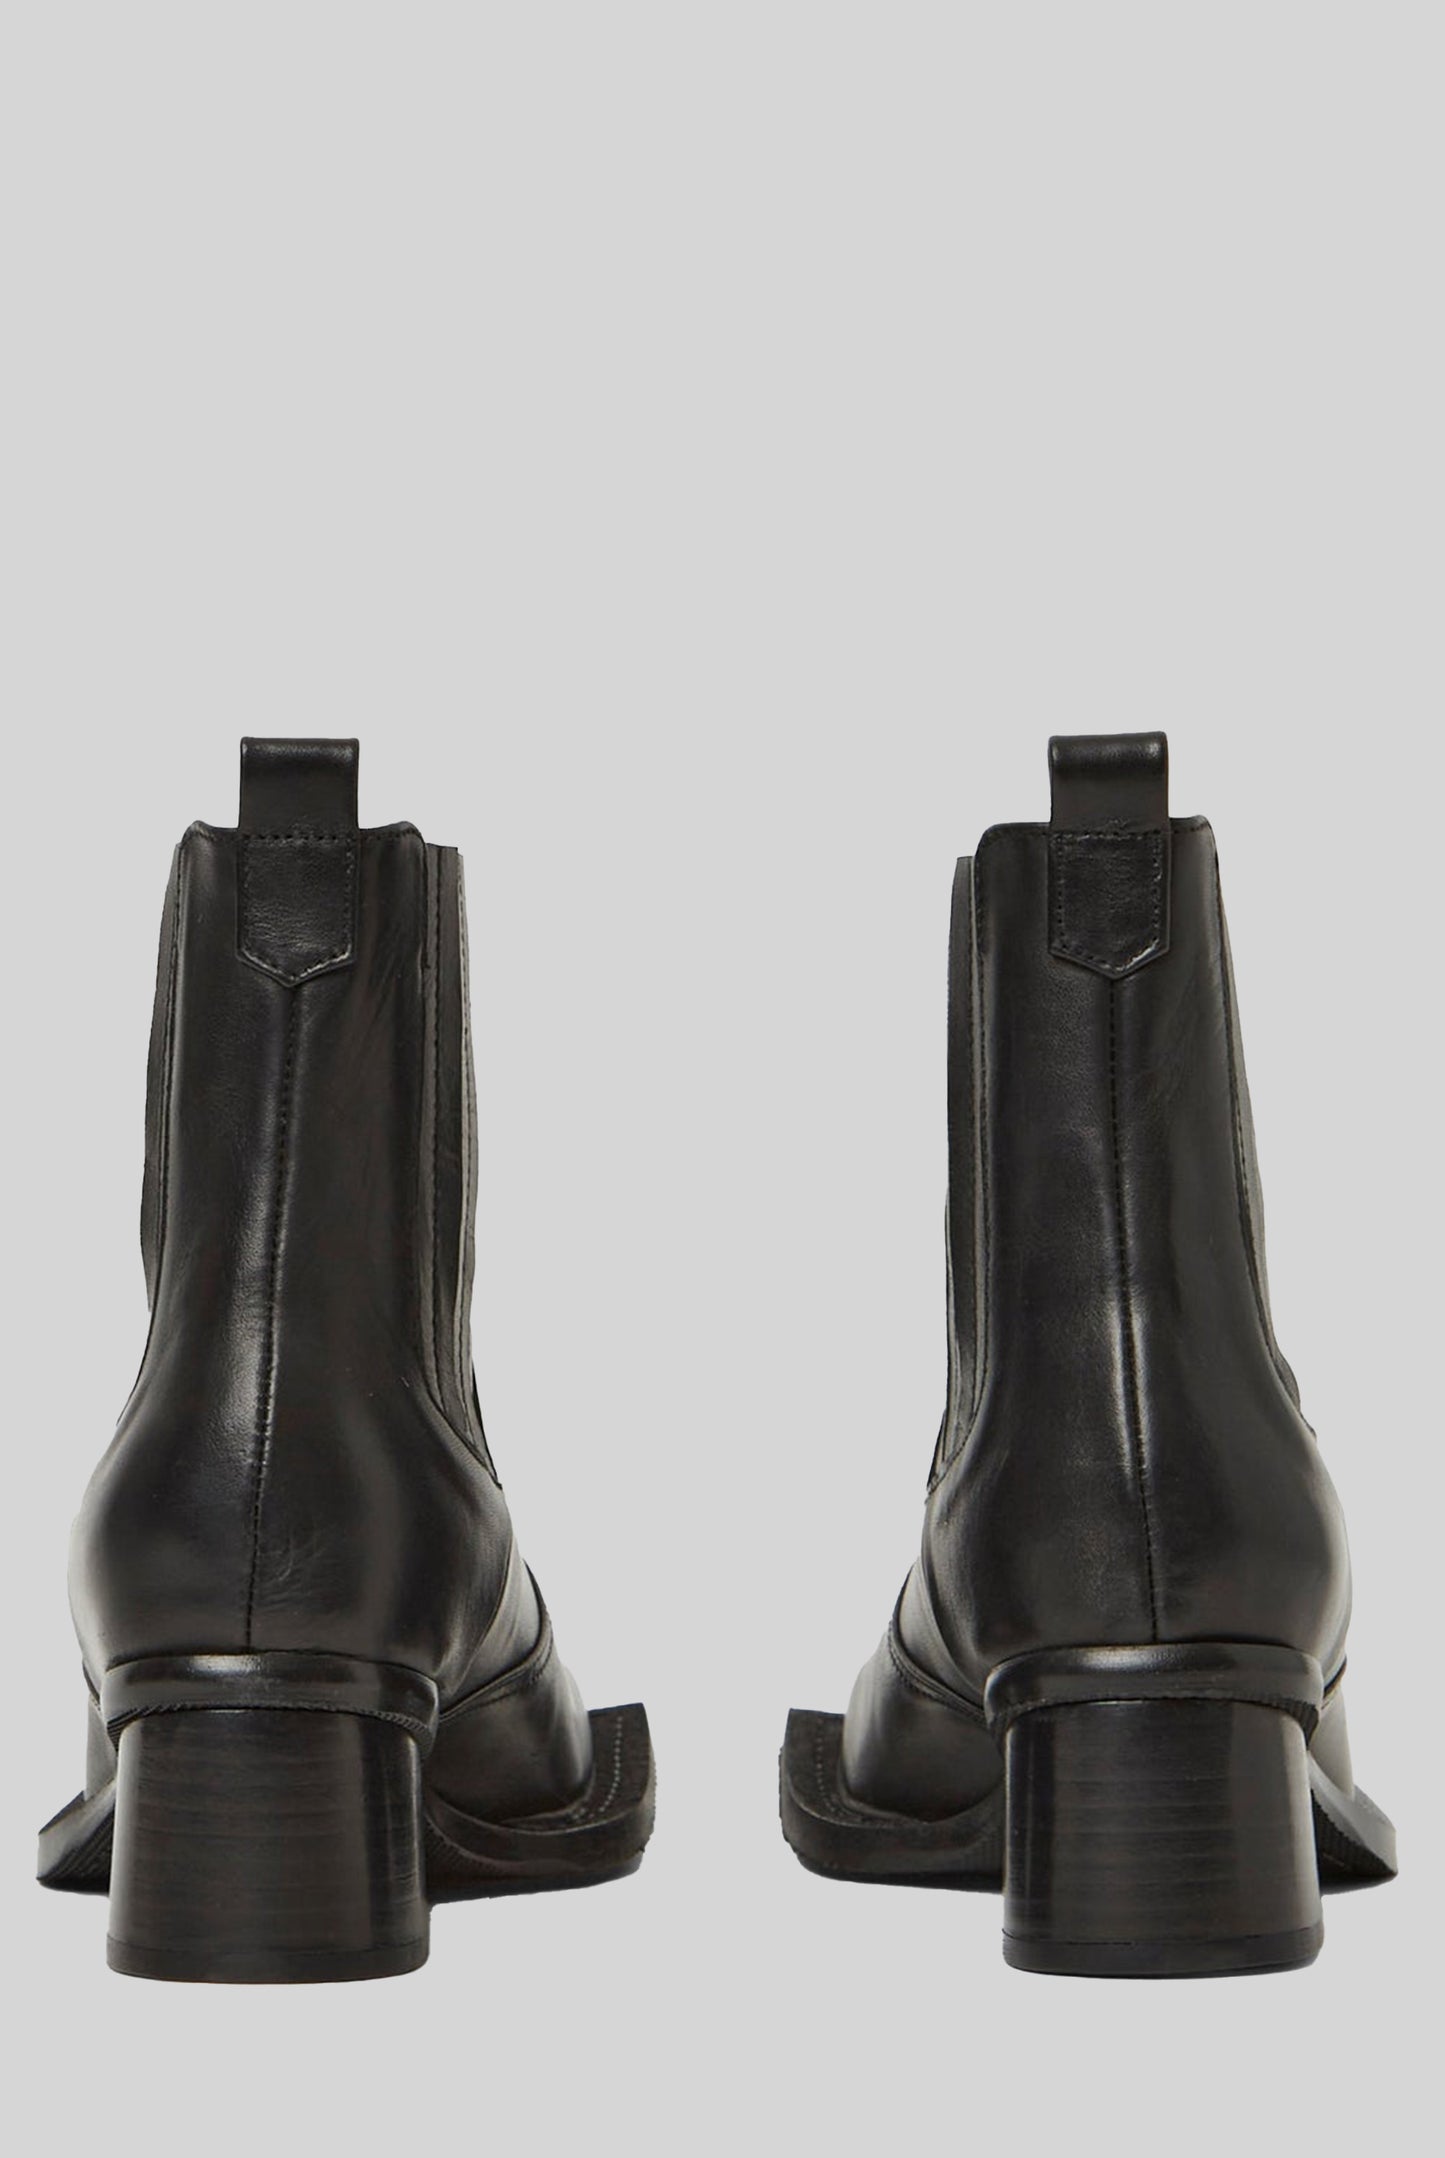 Howler Ankle Boots in Black Leather